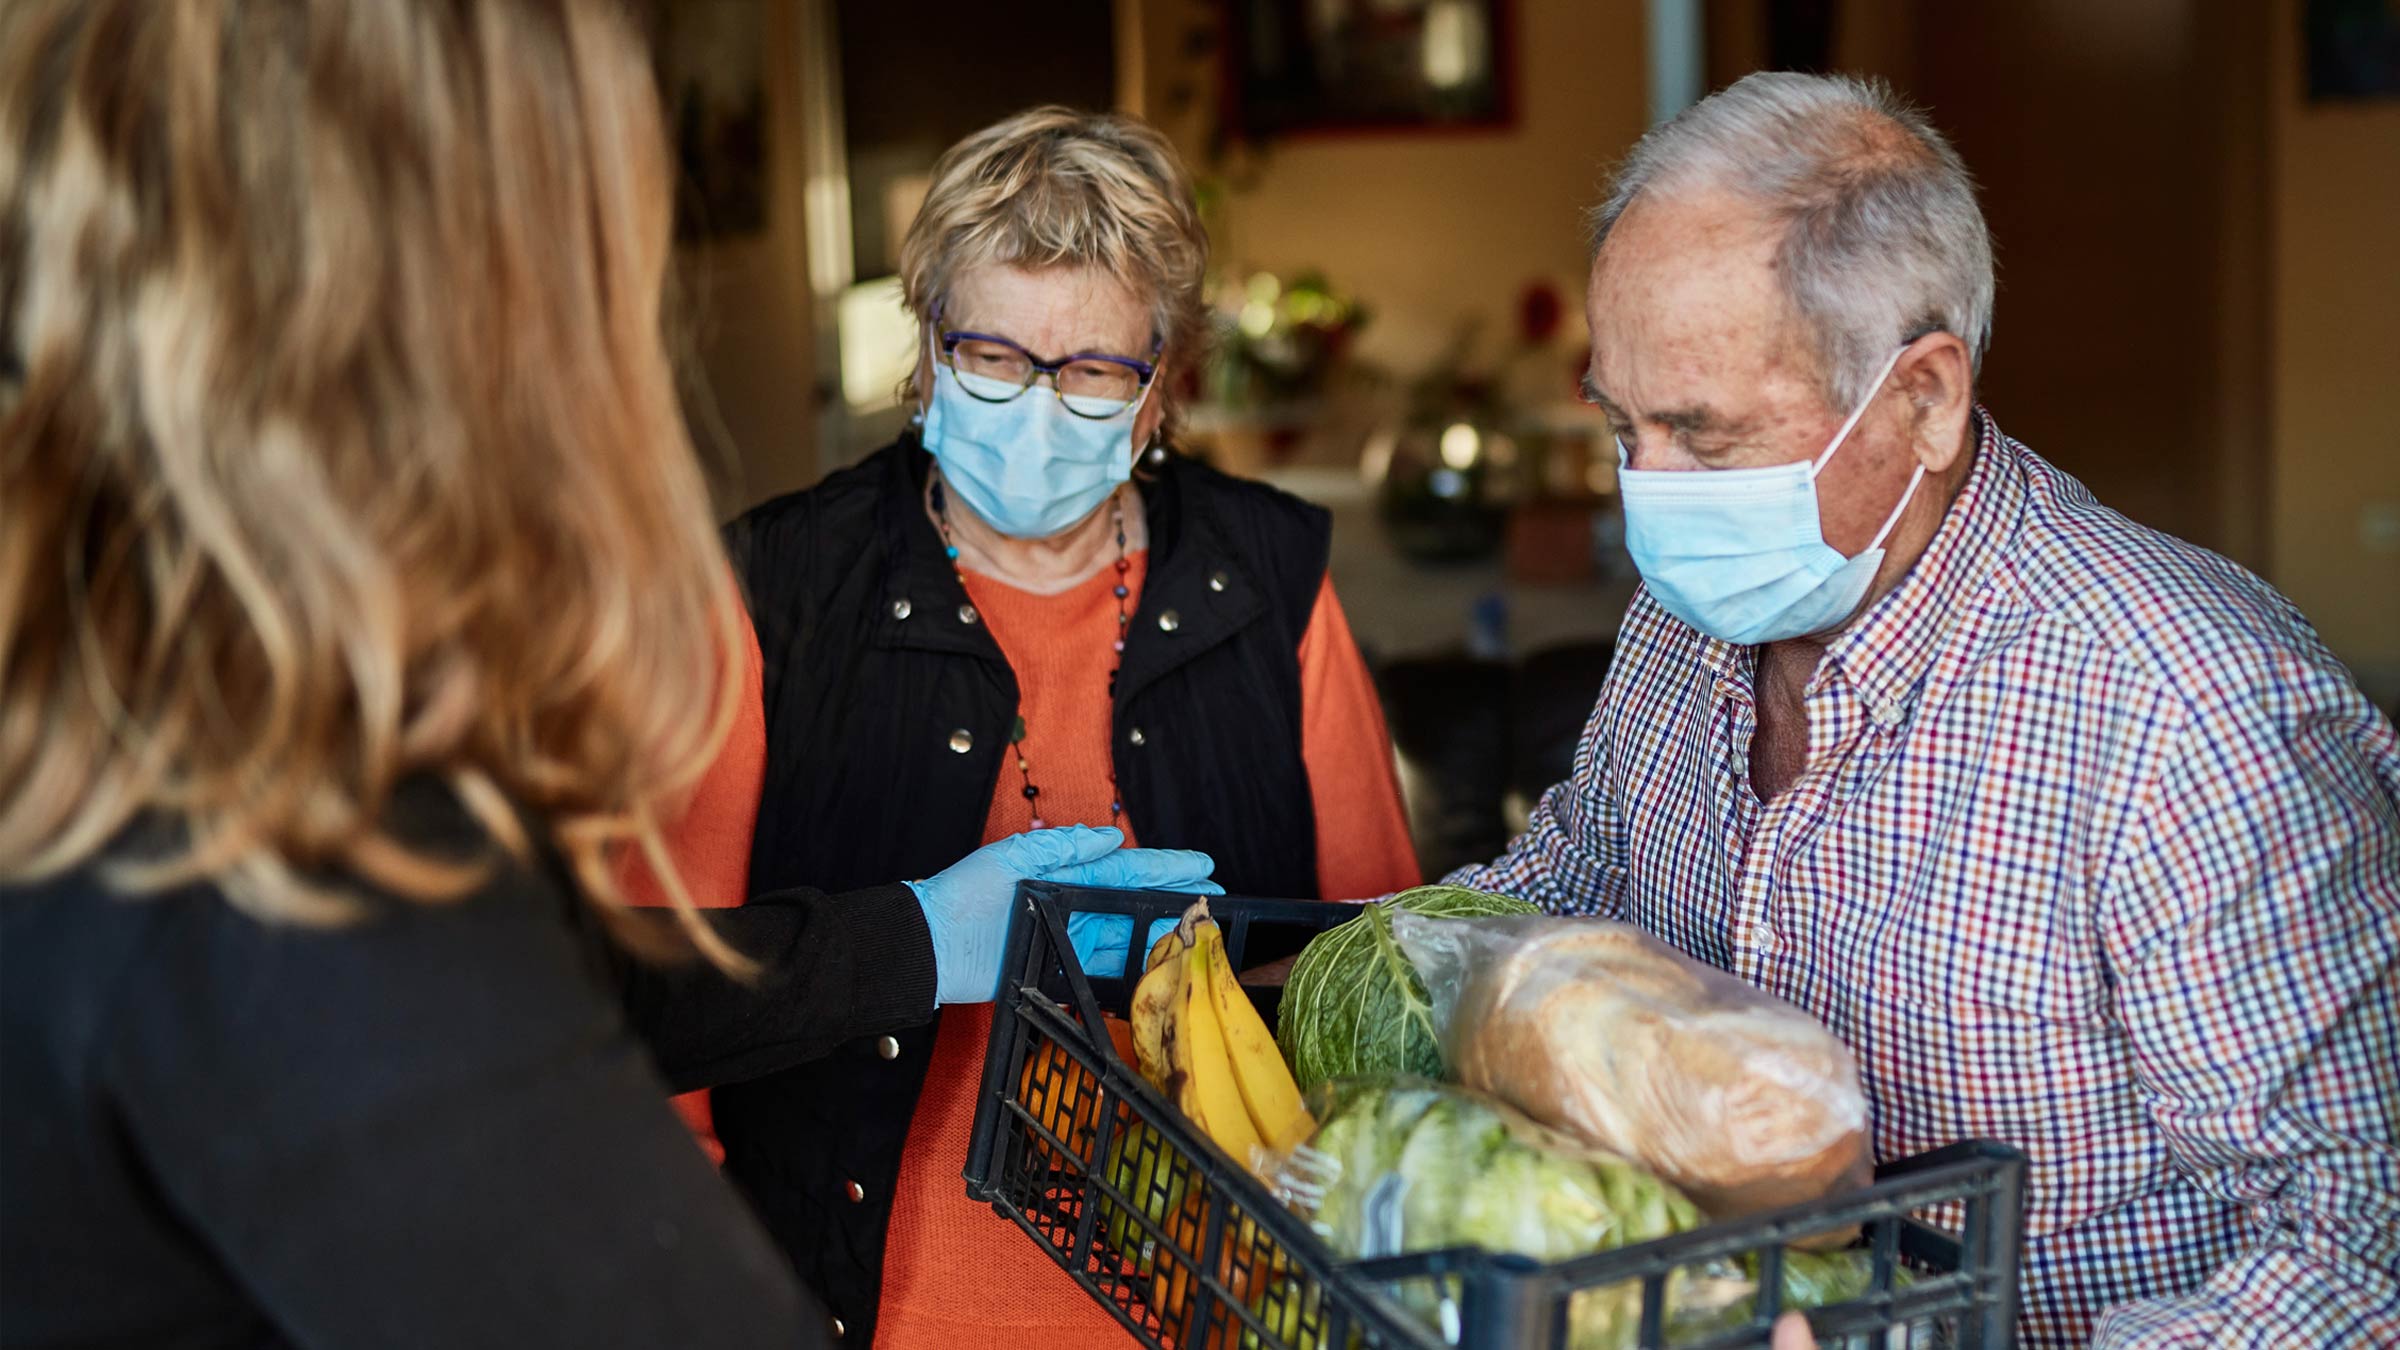 Food being delivered to an older couple wearing masks